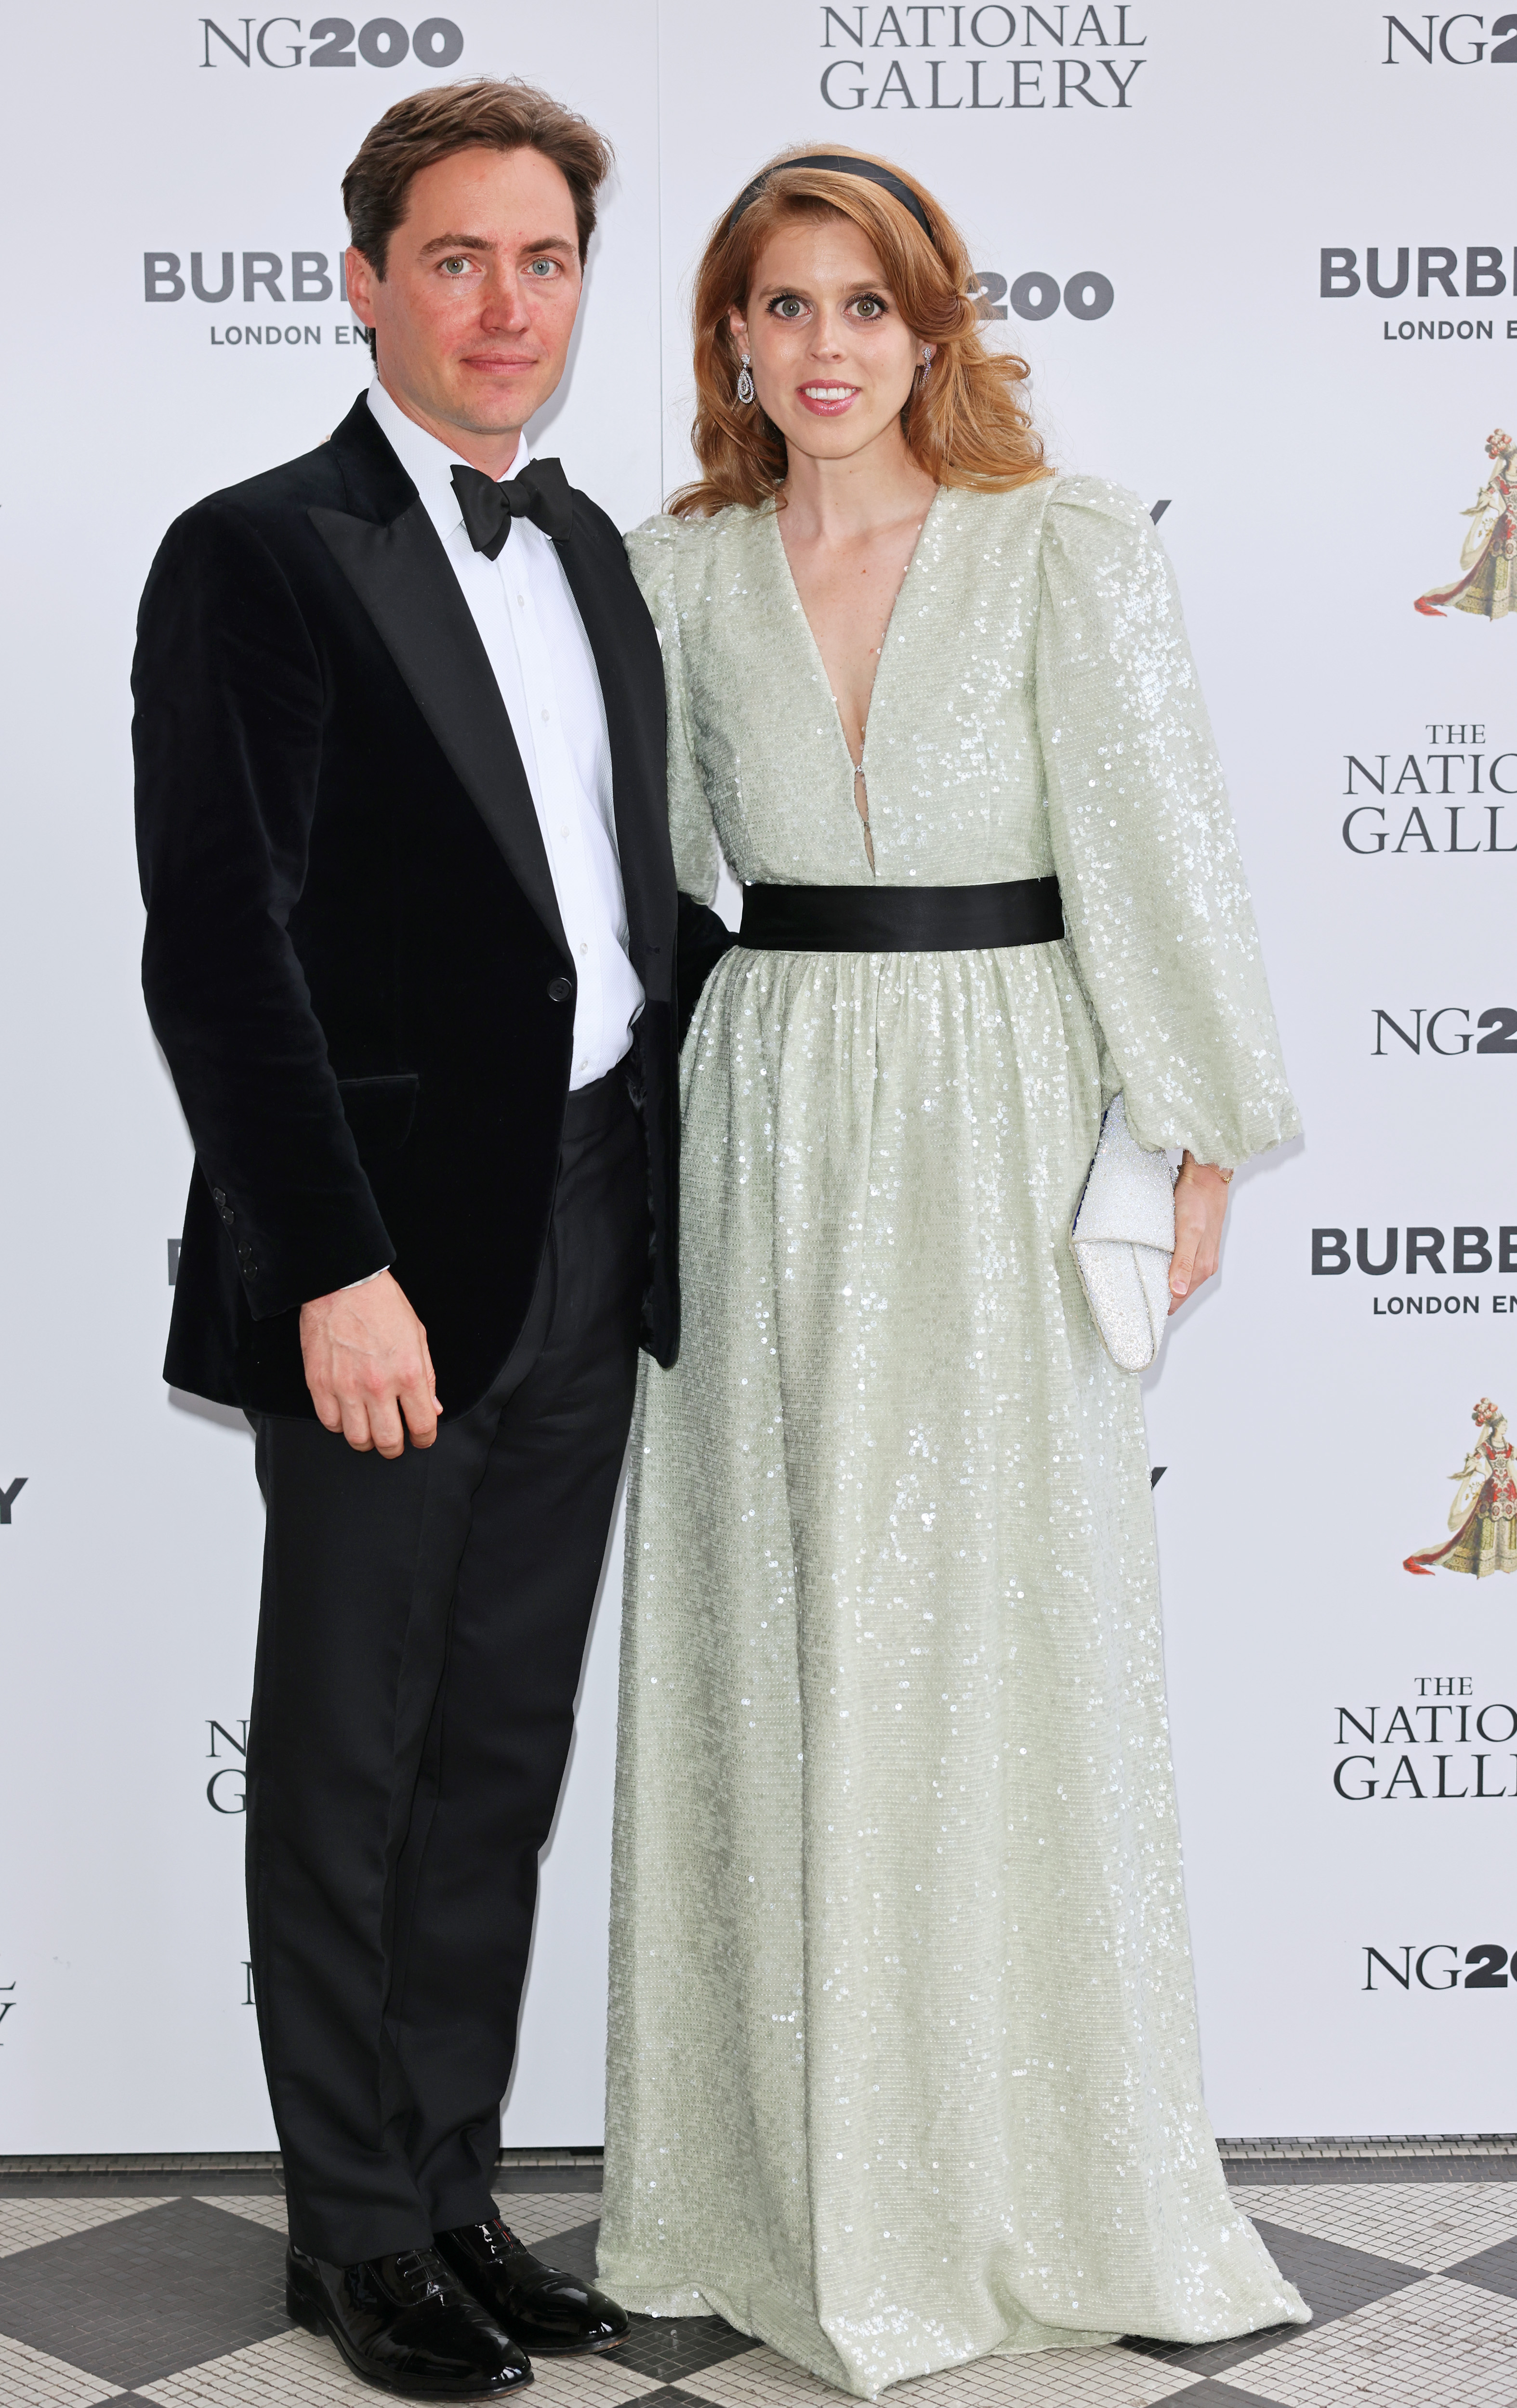 Edoardo Mapelli Mozzi and Princess Beatrice at "The Alchemist's Feast" in London, England on June 23, 2022 | Source: Getty Images